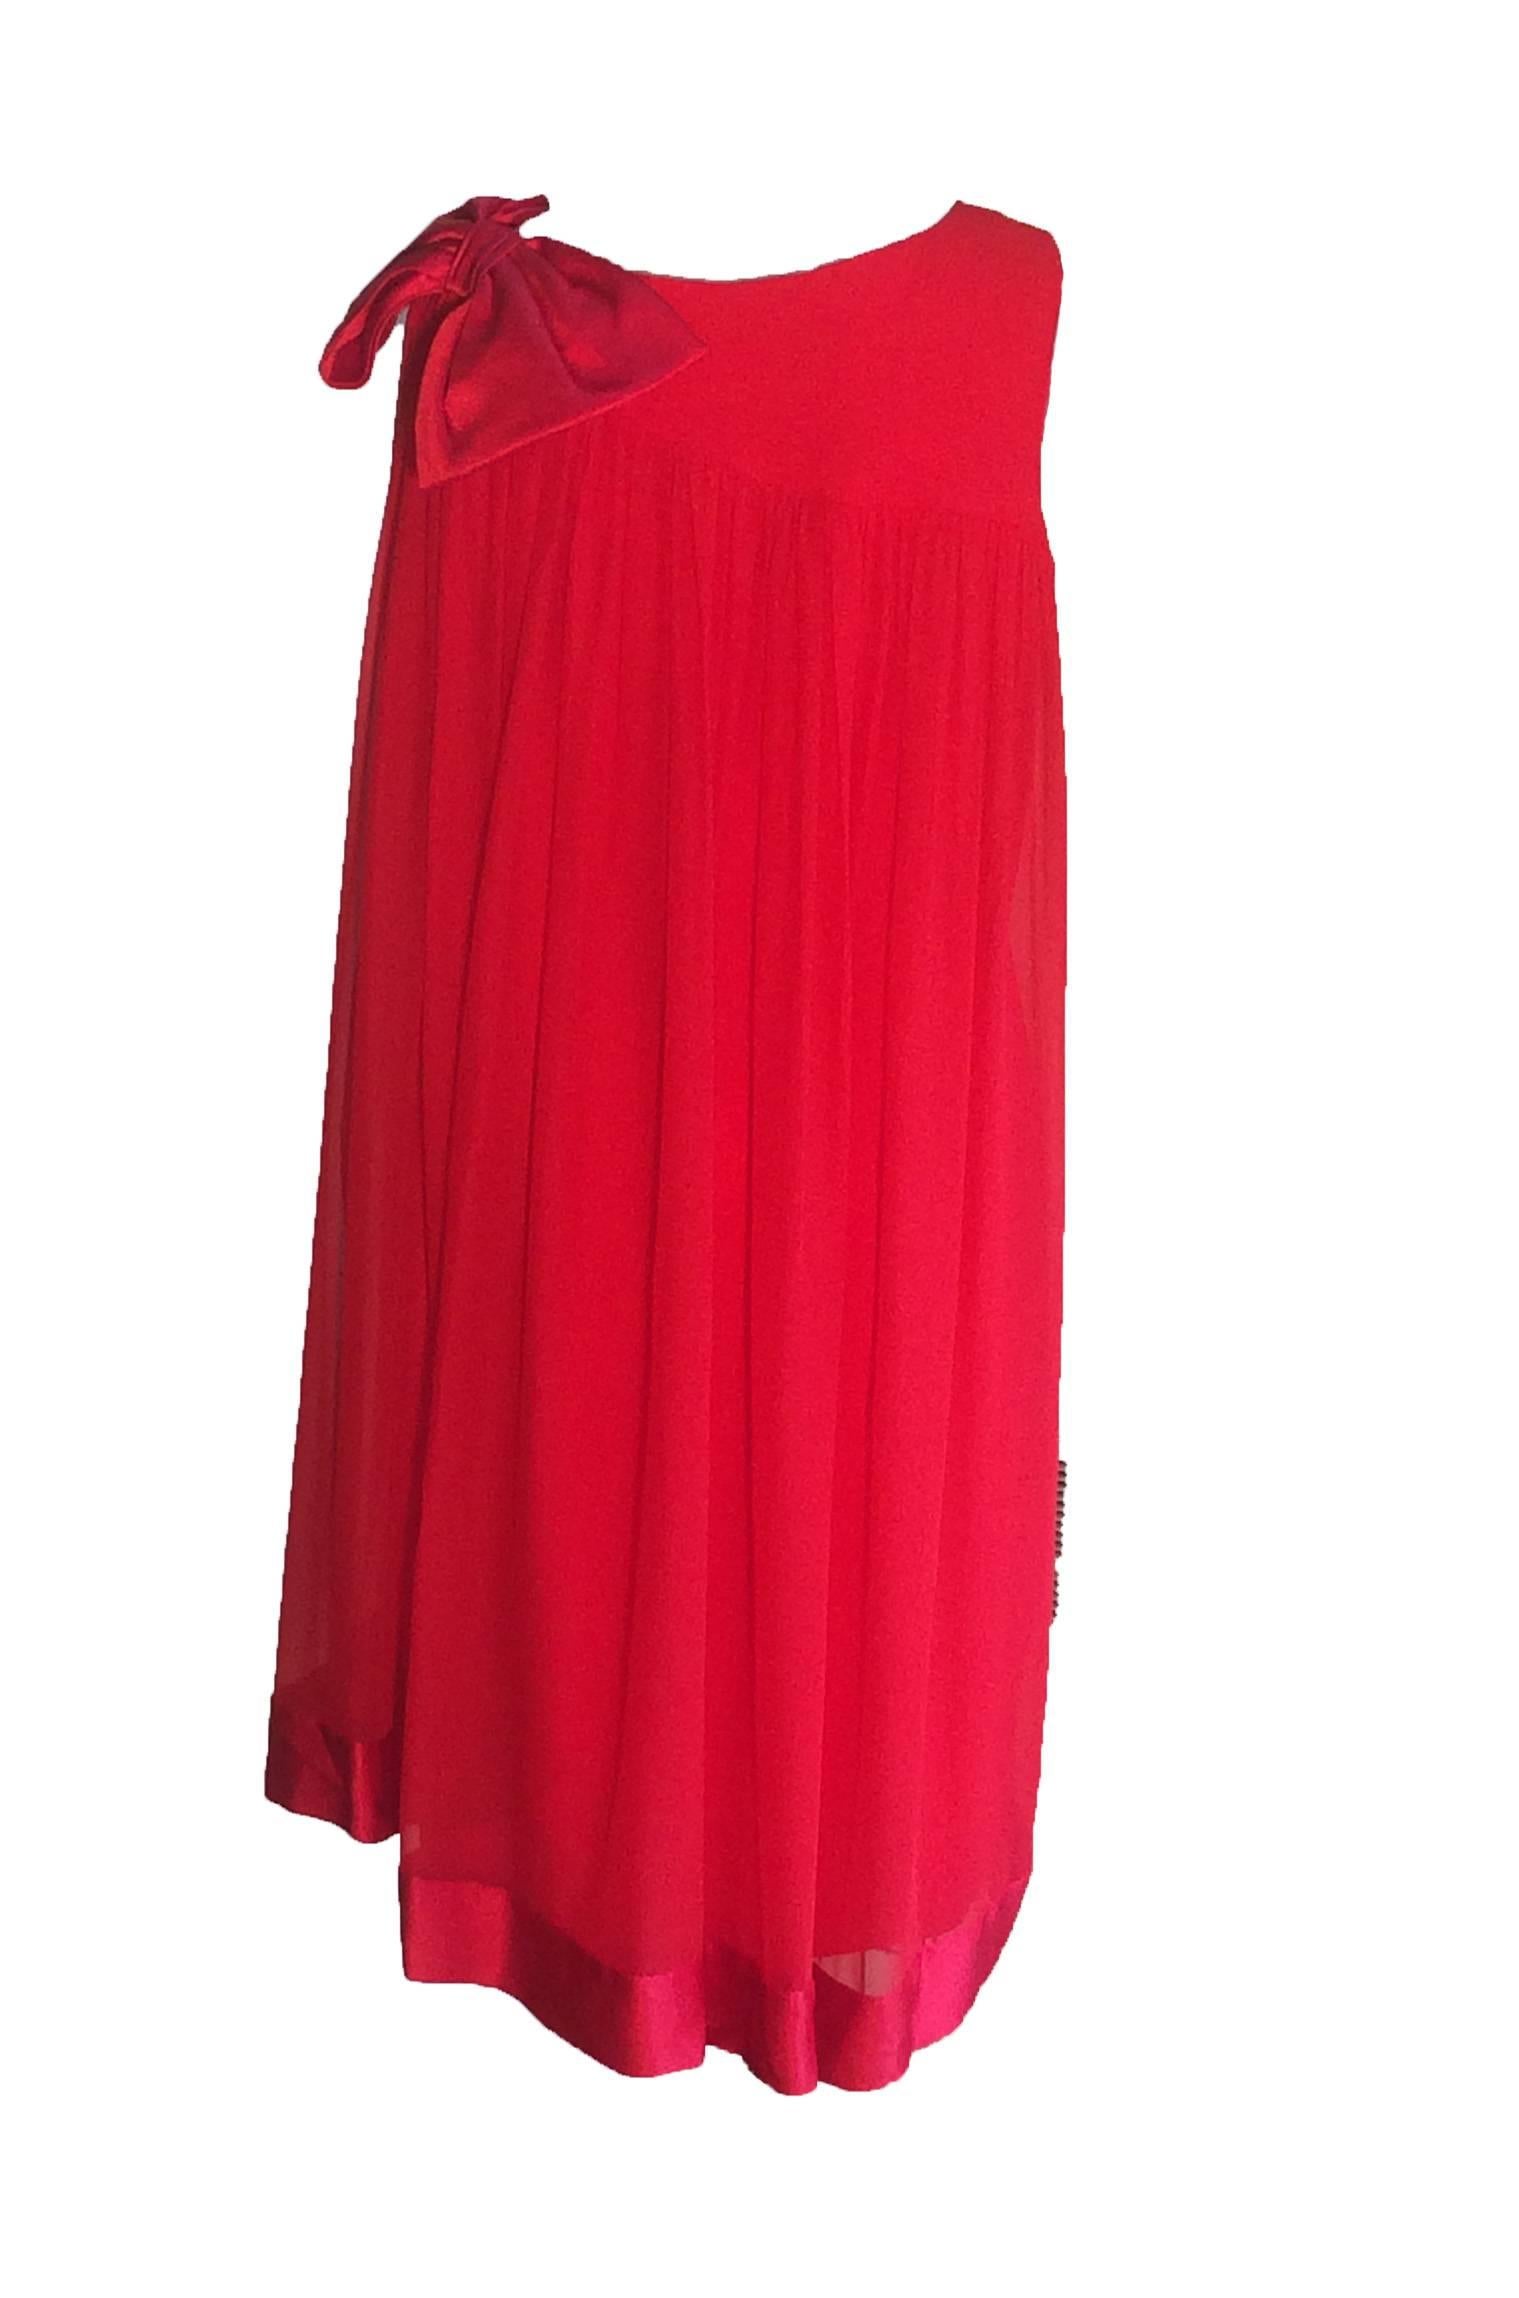 Lilli Diamond 1970s bright red shift dress with huge satiny bow at shoulder. Base shift is made of a taffeta like fabric with a crinkly crepe covering, and a second layer of crepe forms a loose over-layer, which drapes asymmetrically over the